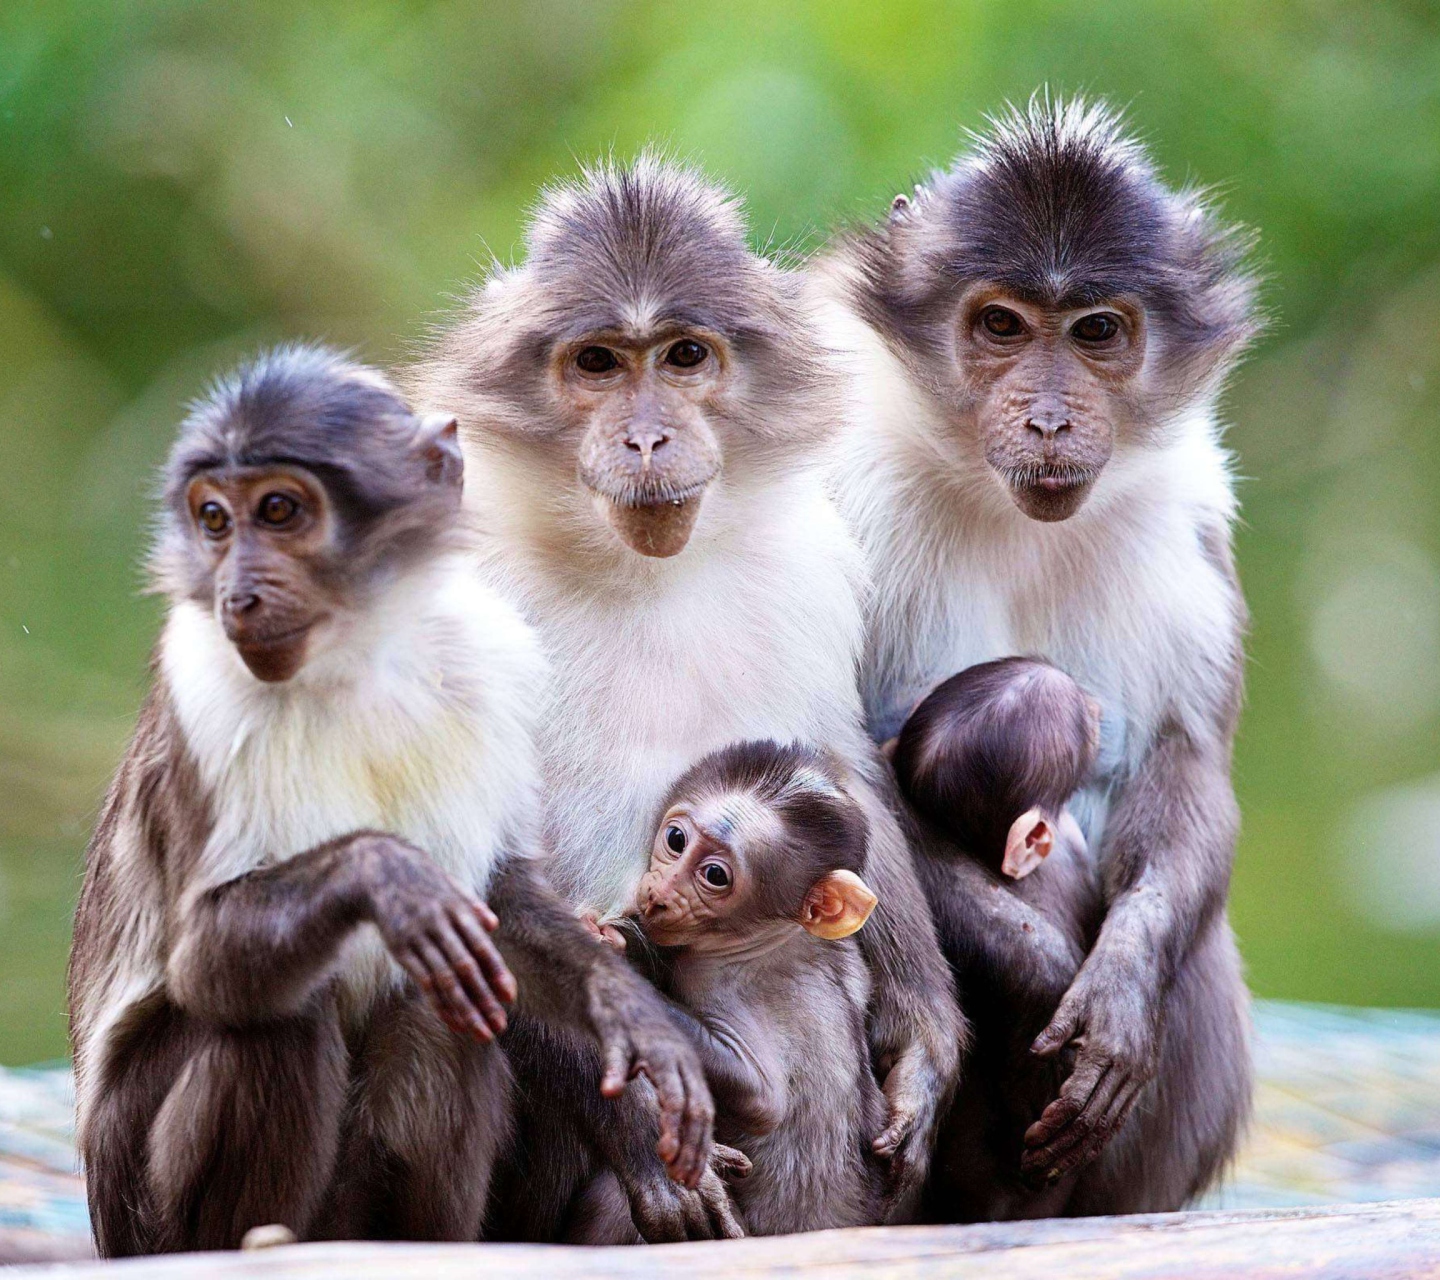 Funny Monkeys With Their Babies screenshot #1 1440x1280